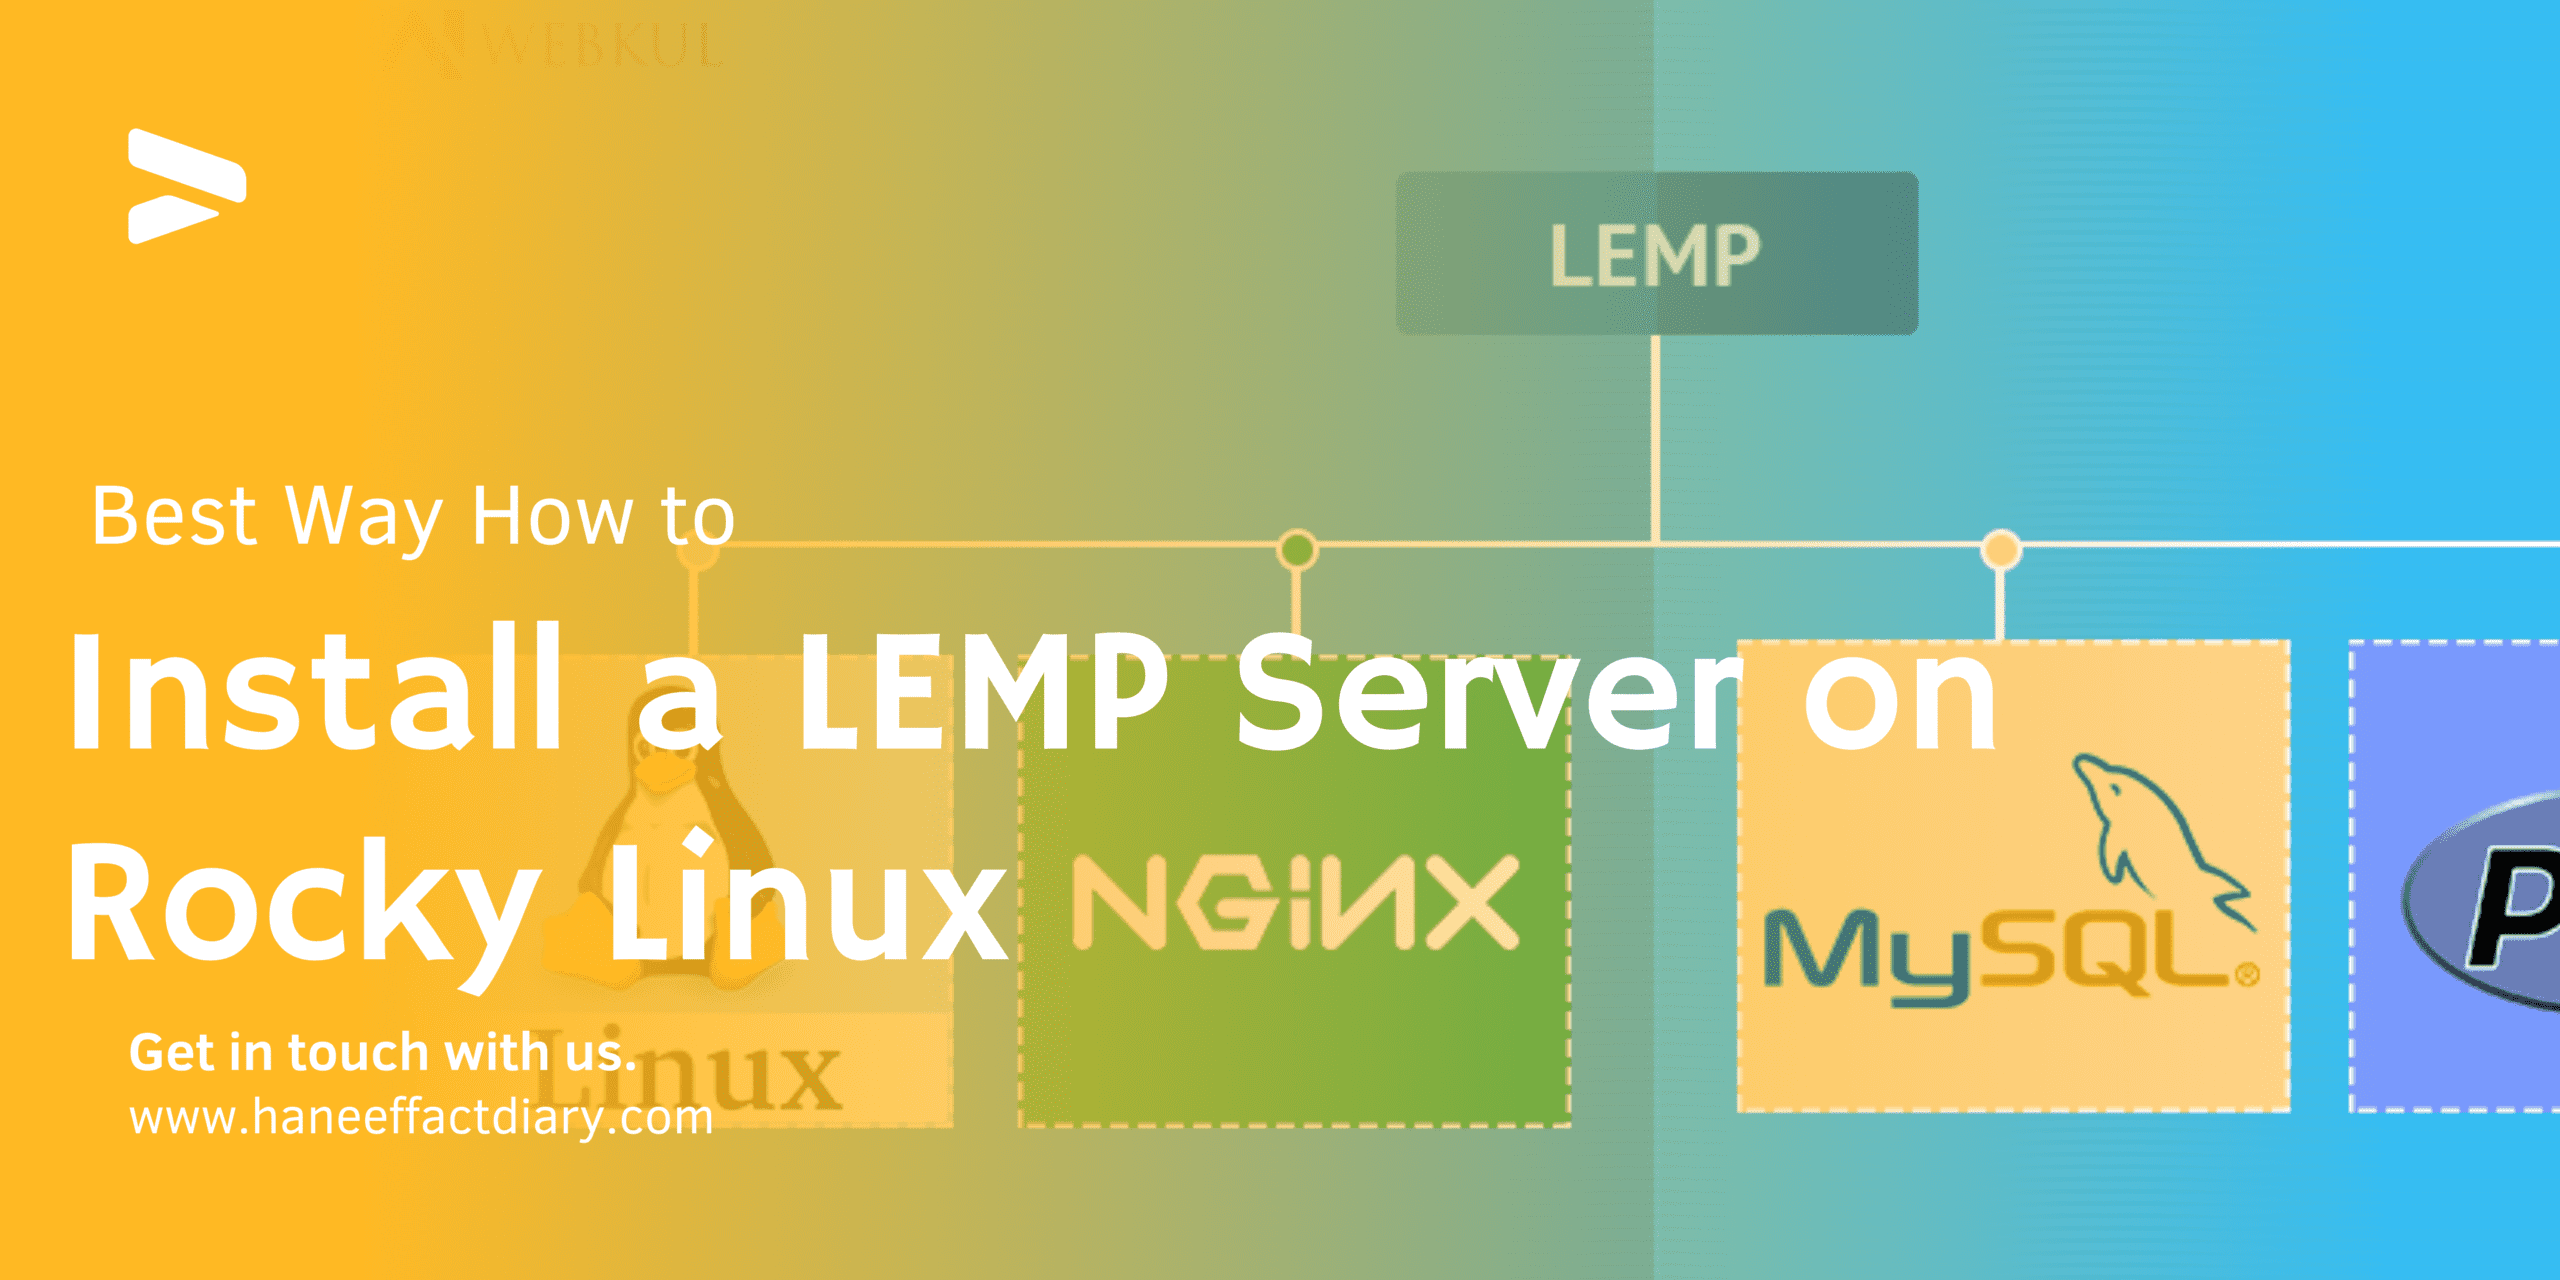 Best Way How to Install a LEMP Server on Rocky Linux